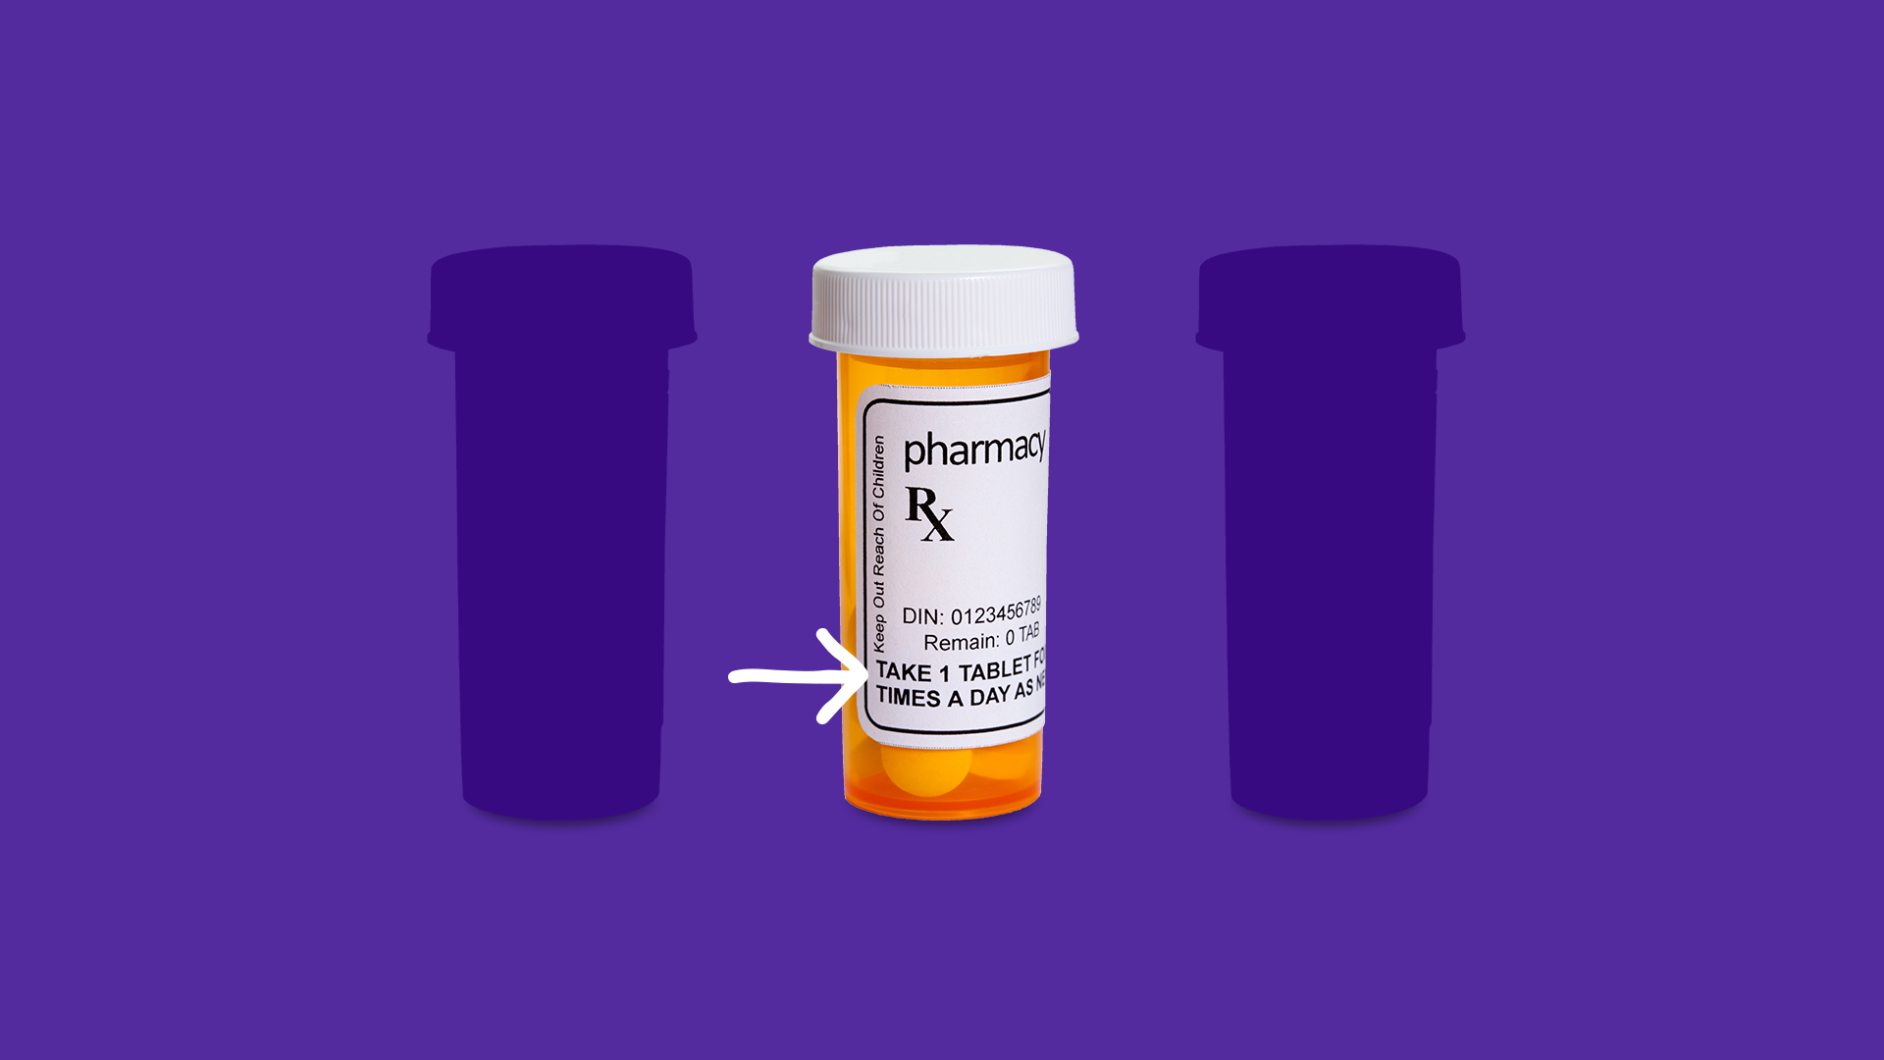 Rx pill bottle: Don't take medication as prescribed